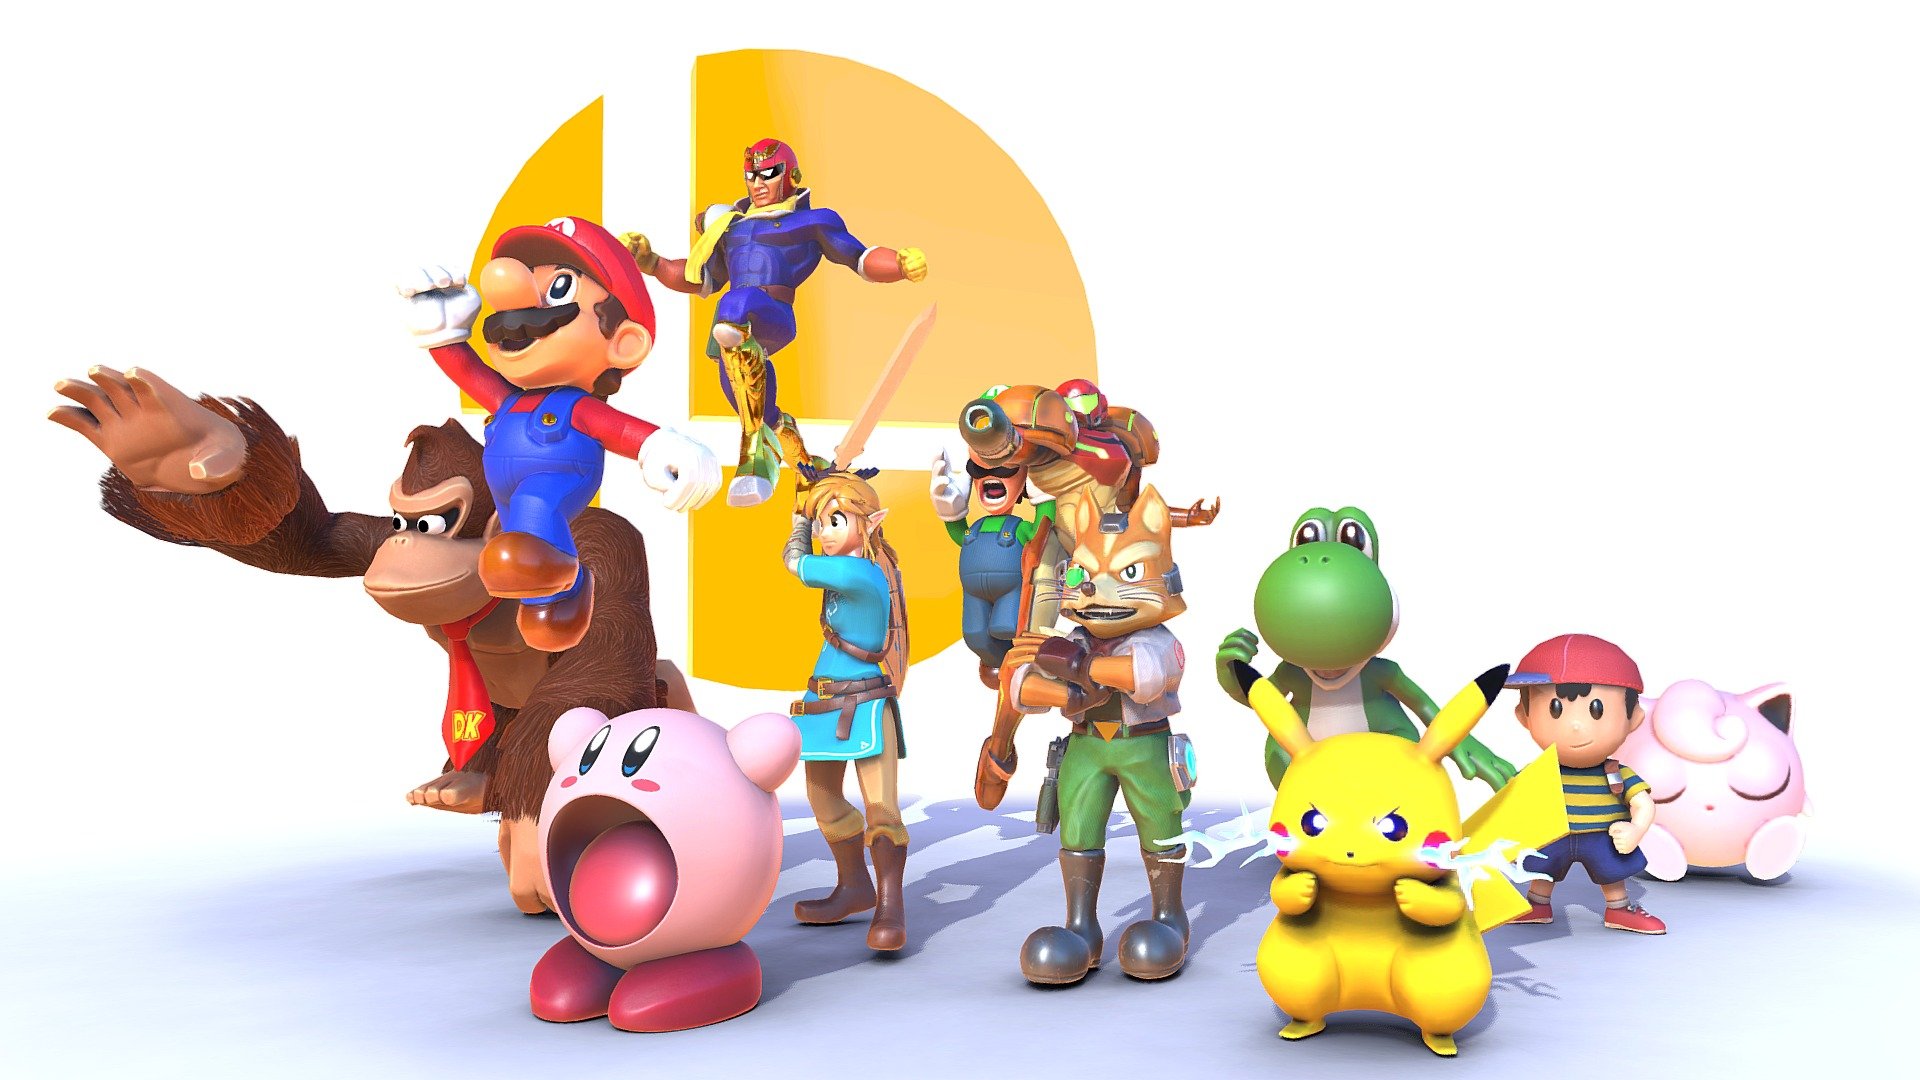 Here’s a challenge I'm doing: modelling a Smash Bros character each day until Smash Ultimate releases. This project started October 2nd. I probably won’t manage to strictly model one per day but I’m eager to see it through.

Anyway, here are the original 12 from Super Smash Bros 64. This is my taking on the original Nintendo characters that debuted in the first entry of the Smash series. They’re all low poly, PBR with a cartoon style. Hope you like it and look forward for future characters! - Super Smash Bros: The Original 12 - 3D model by Giru 3d model